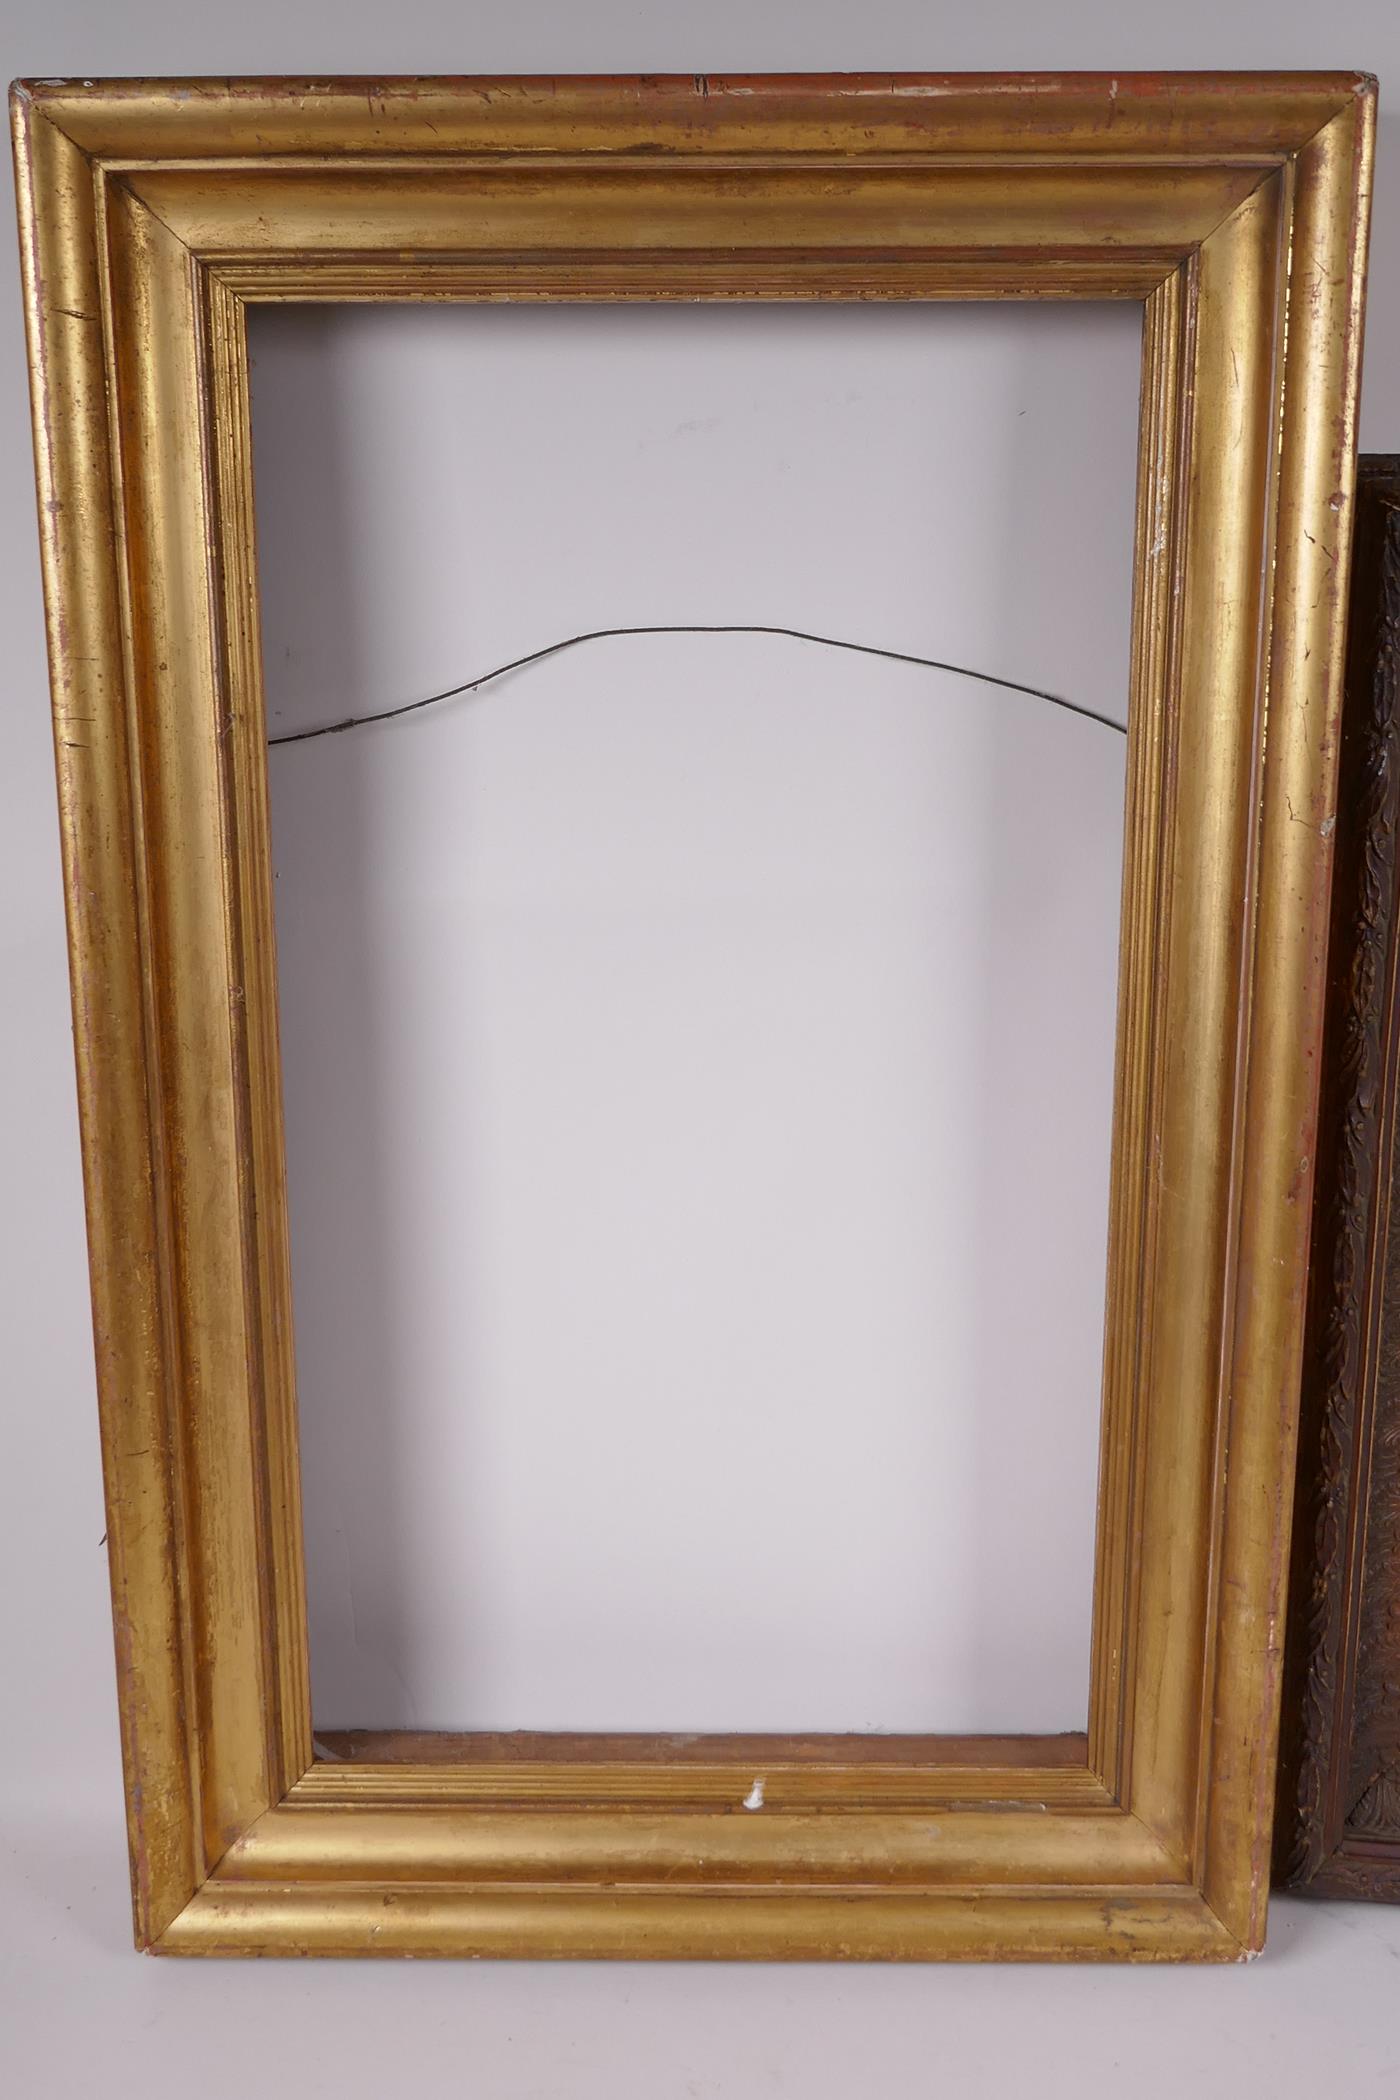 A C19th swept gilt picture frame, rebate3 17" x 9", together with a good gilt plaster frame, - Image 2 of 3